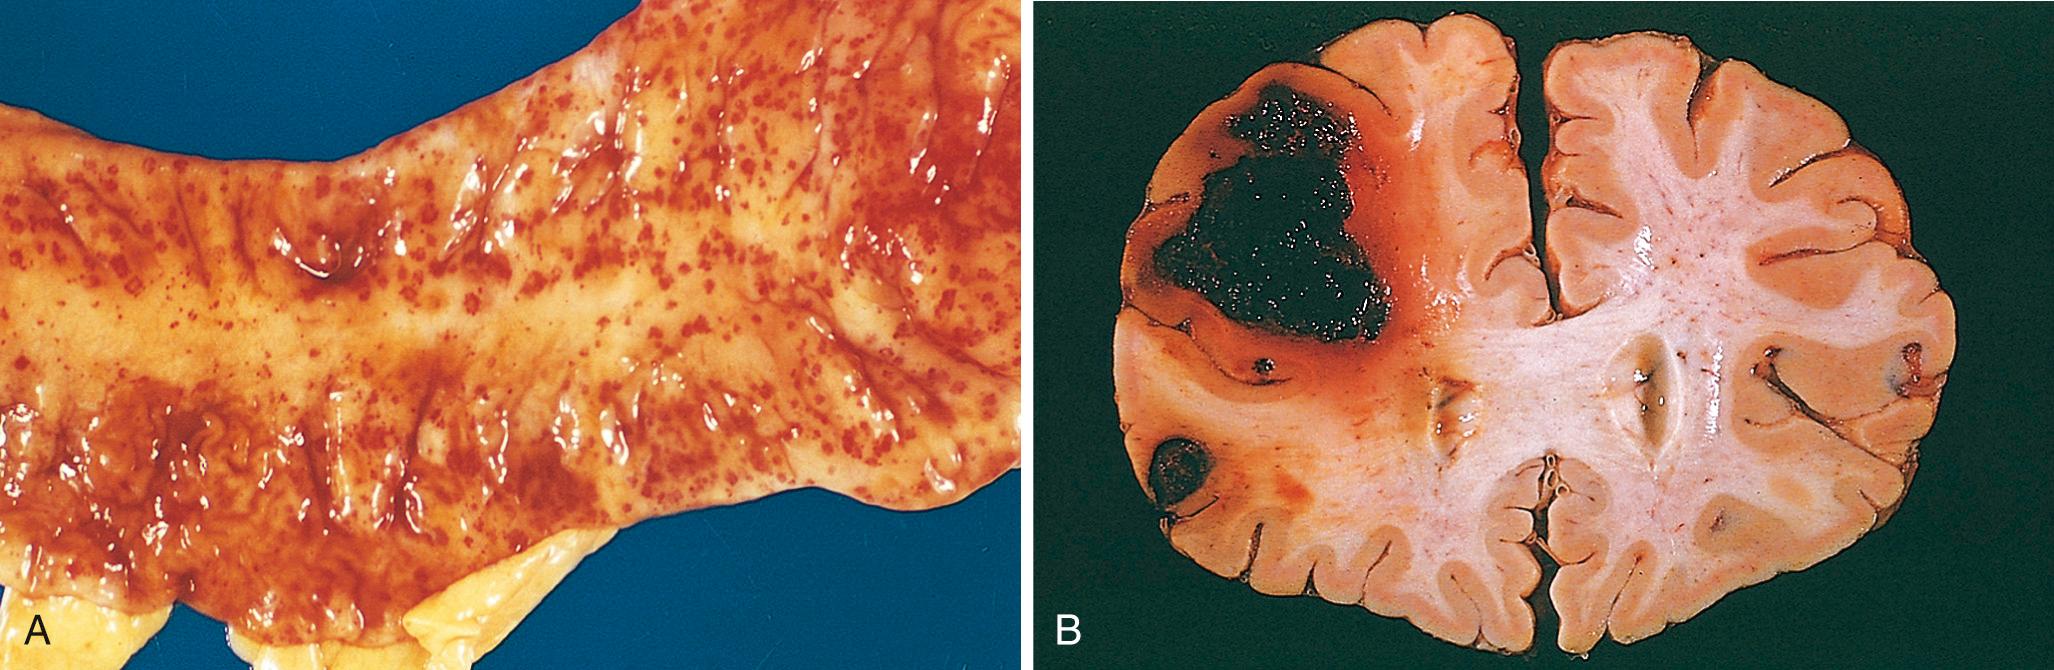 Figure 4.11, (A) Punctate petechial hemorrhages of the colonic mucosa, a consequence of thrombocytopenia. (B) Fatal intracerebral bleed.